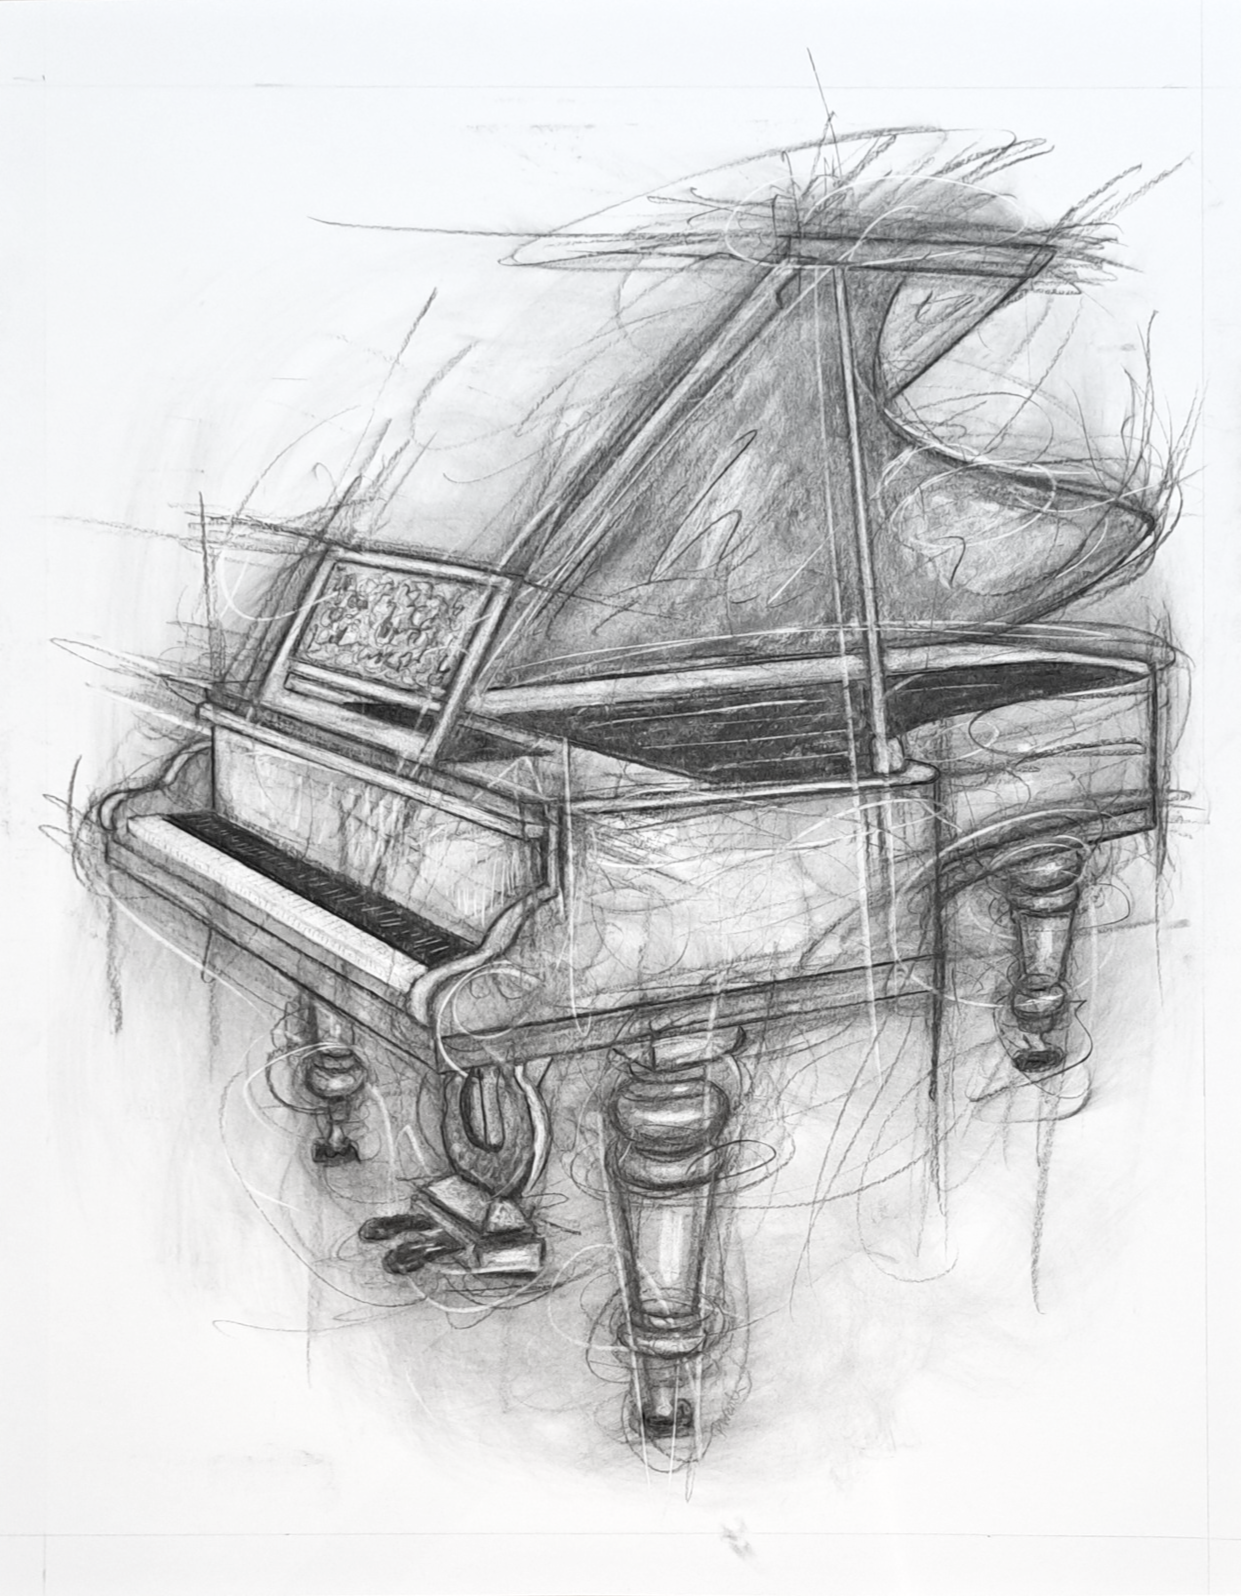 Penny Warden Piano 60x84cm drawing original hand-drawn pencil and charcoal artwork of Grand Piano instrument in modern abstract art style